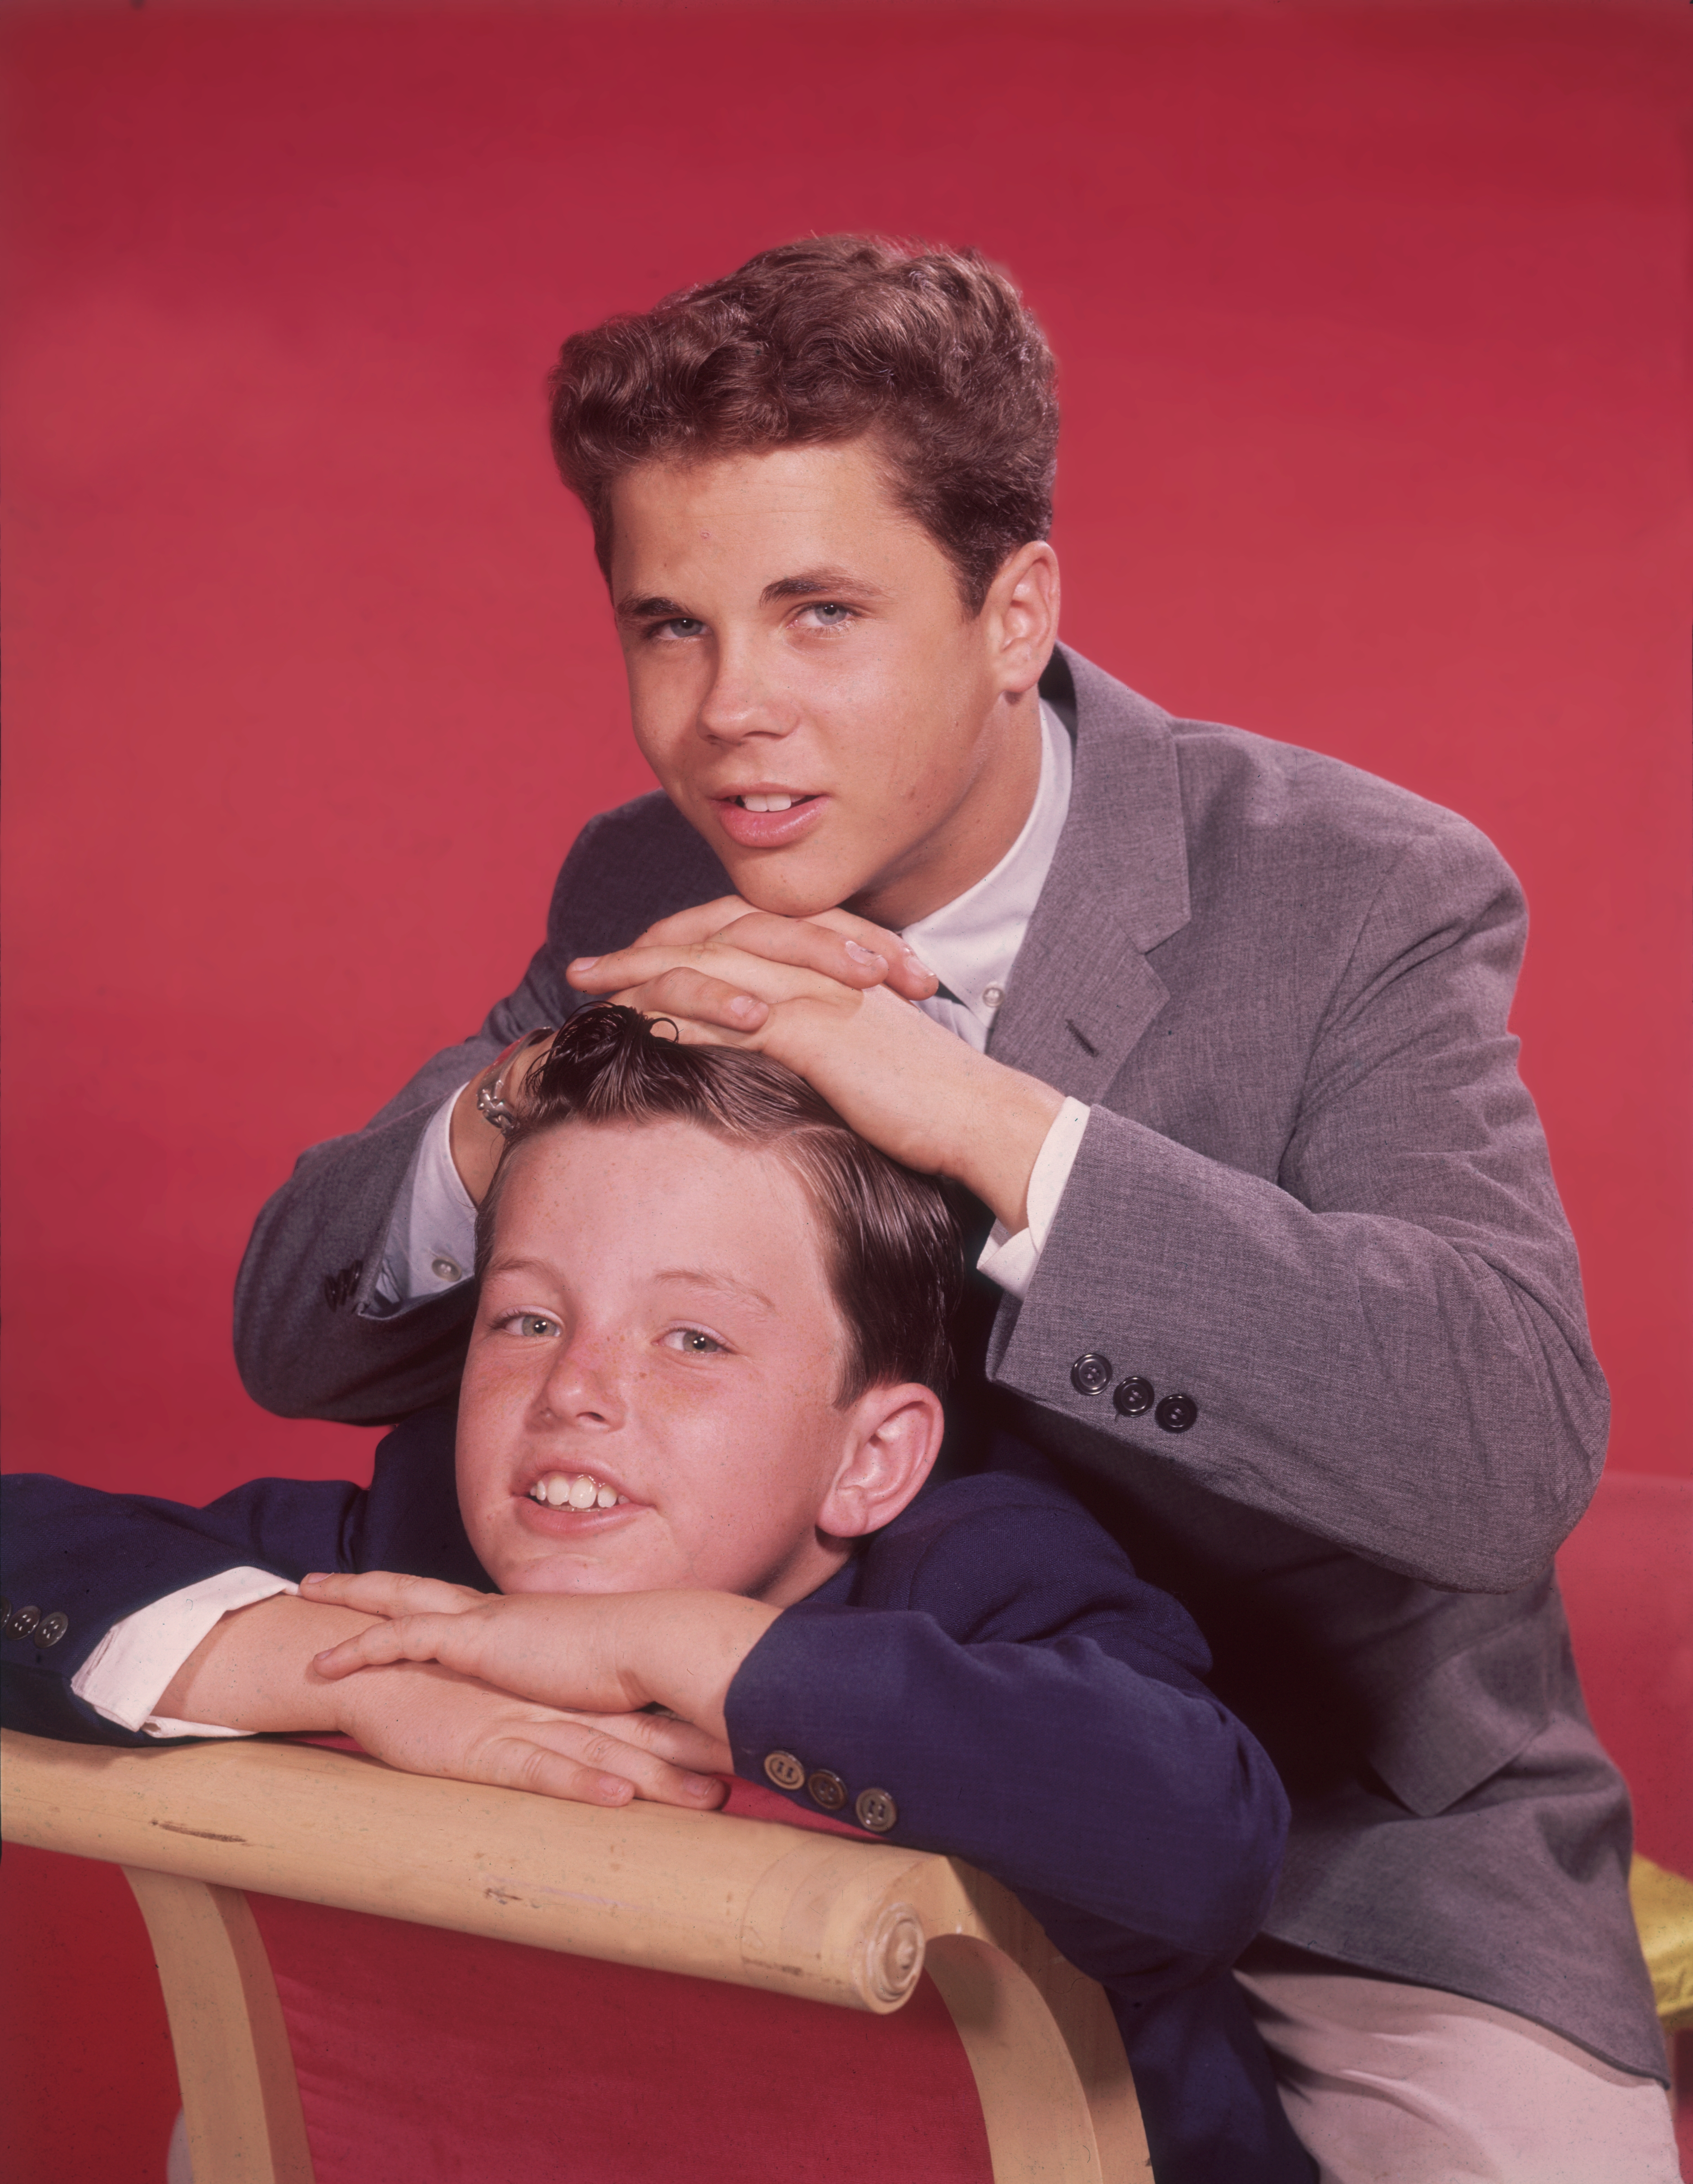 Tony Dow as Wally Cleaver and Jerry Mathers as Theodore "Beaver" Cleaver in "Leave It To Beaver" circa 1957 | Source: Getty Images